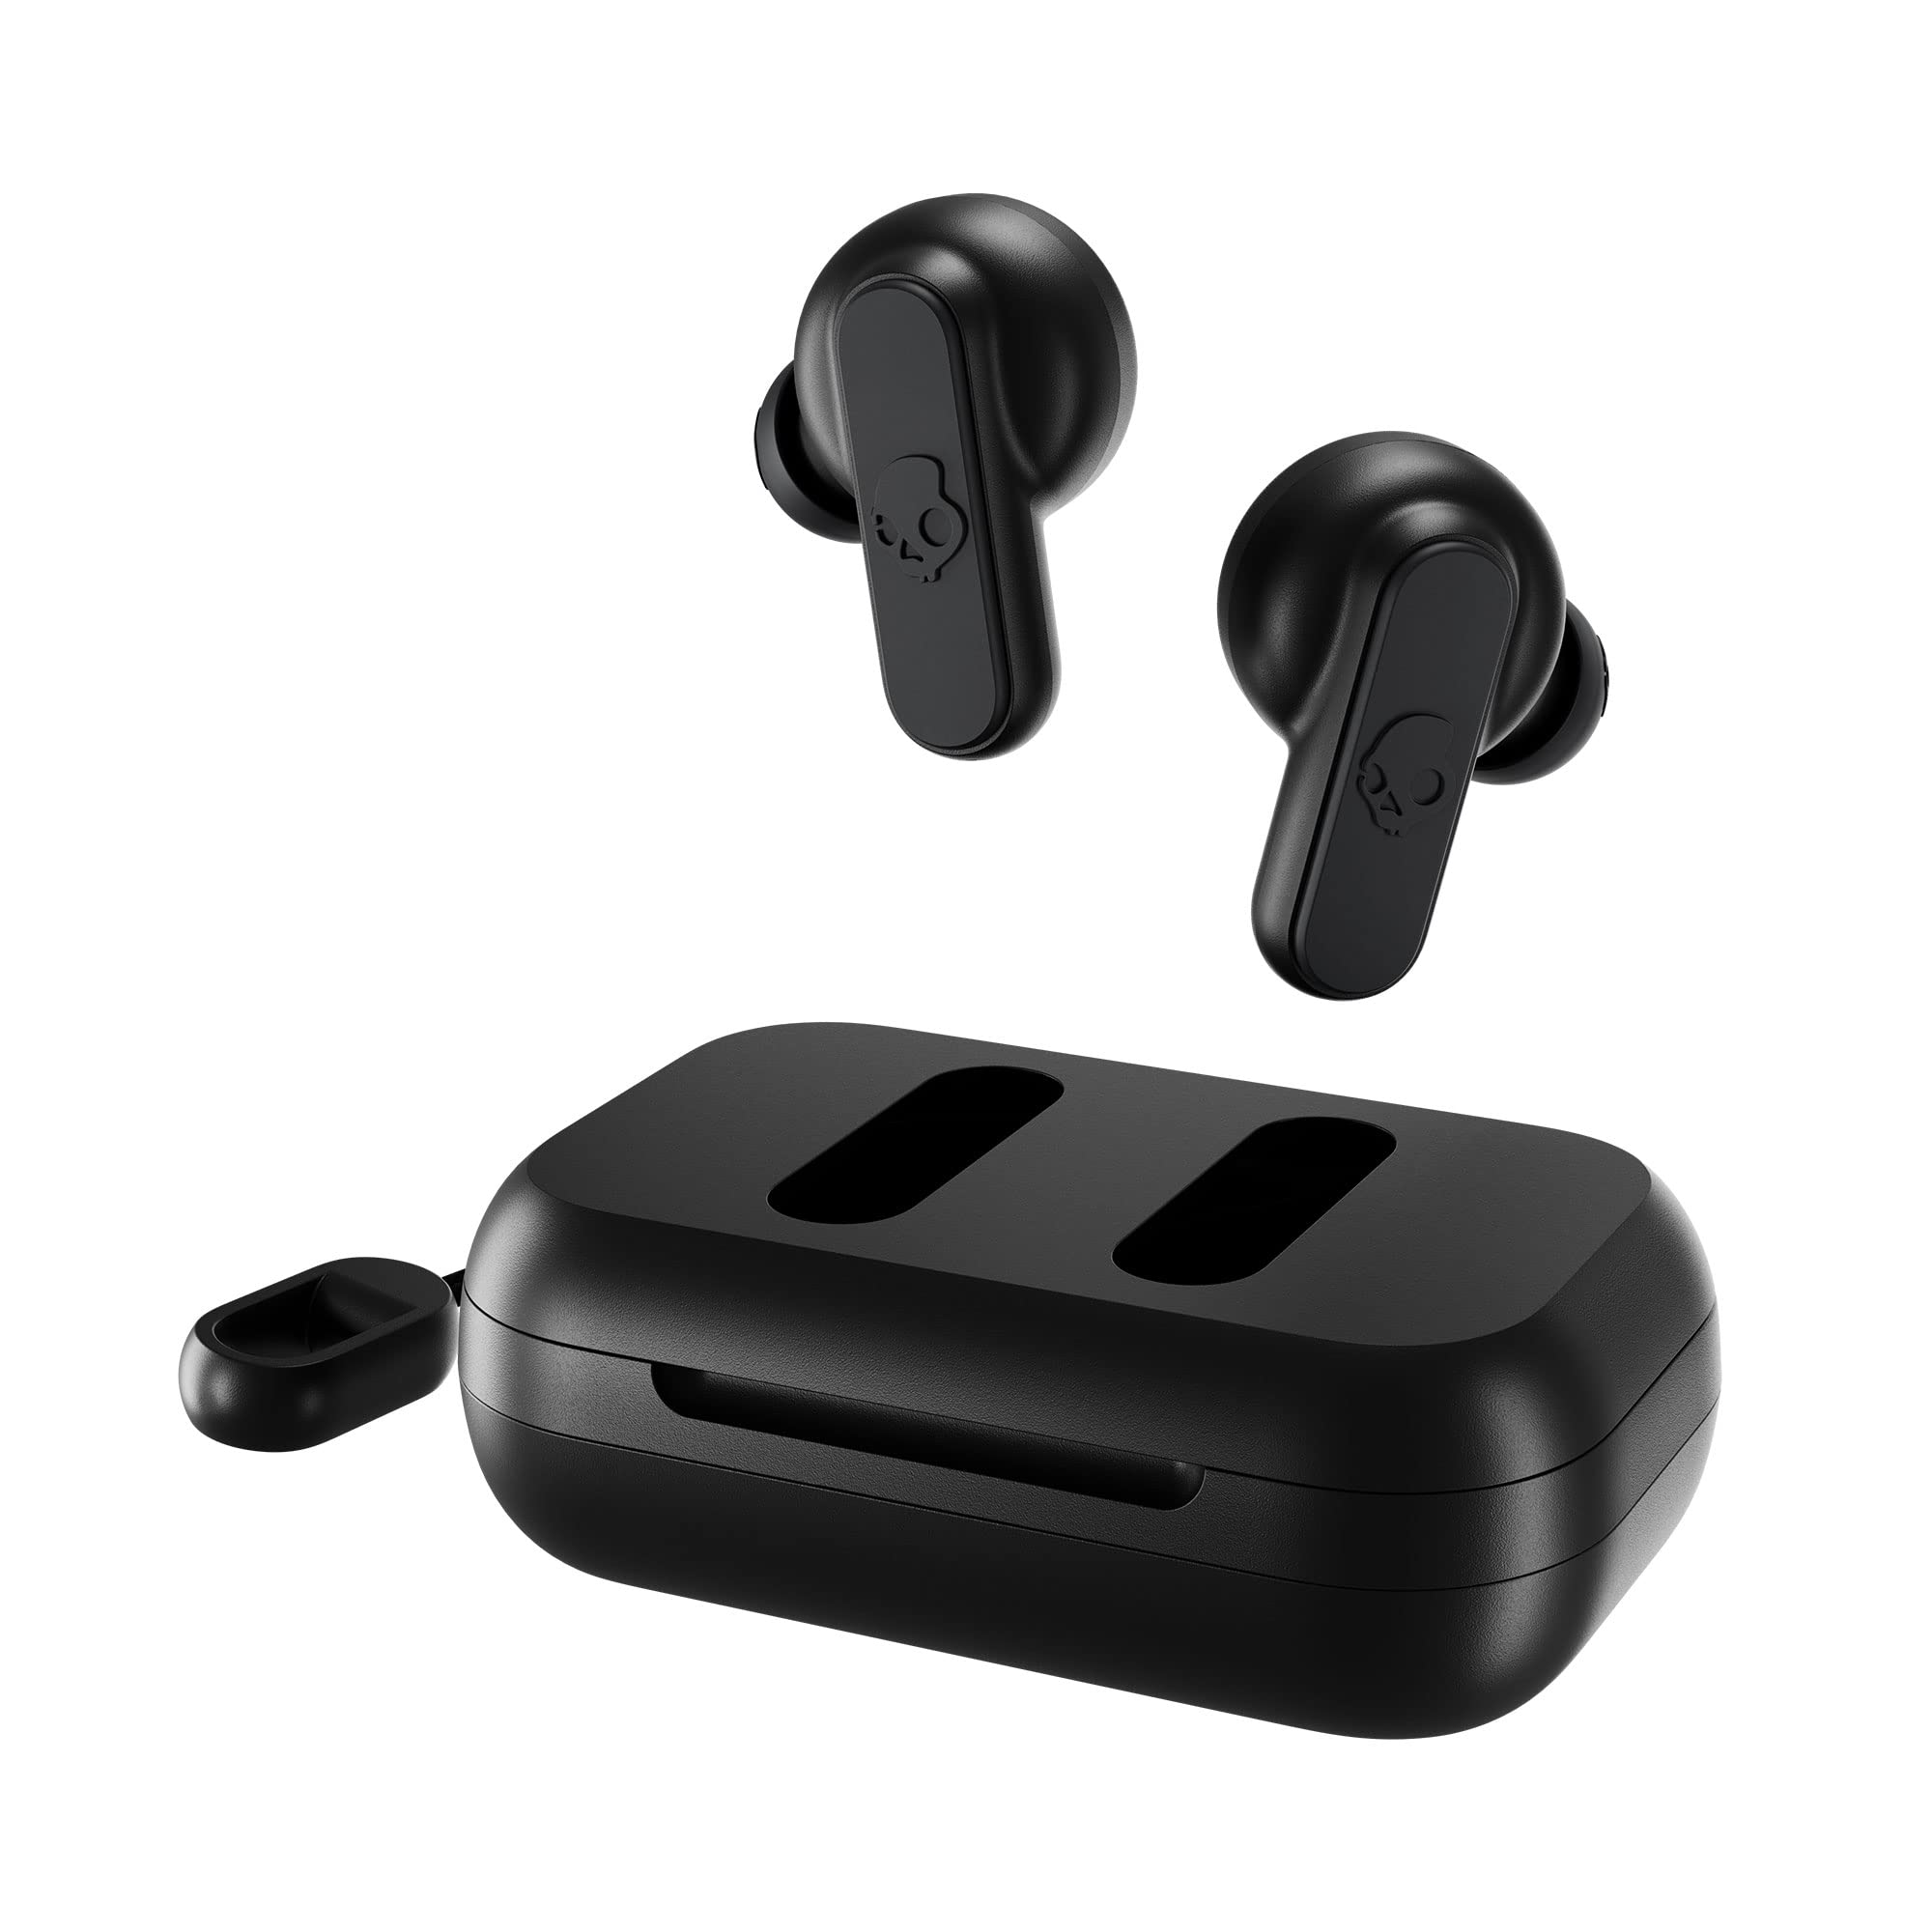 Skullcandy Dime 2 True Wireless In-Ear Bluetooth Earbuds, Use with iPhone and Android. Charging Case, Tile, and Microphone. Best for Gym, Sports, and Gaming, IPX4 Sweat and Dust Resistant - Black